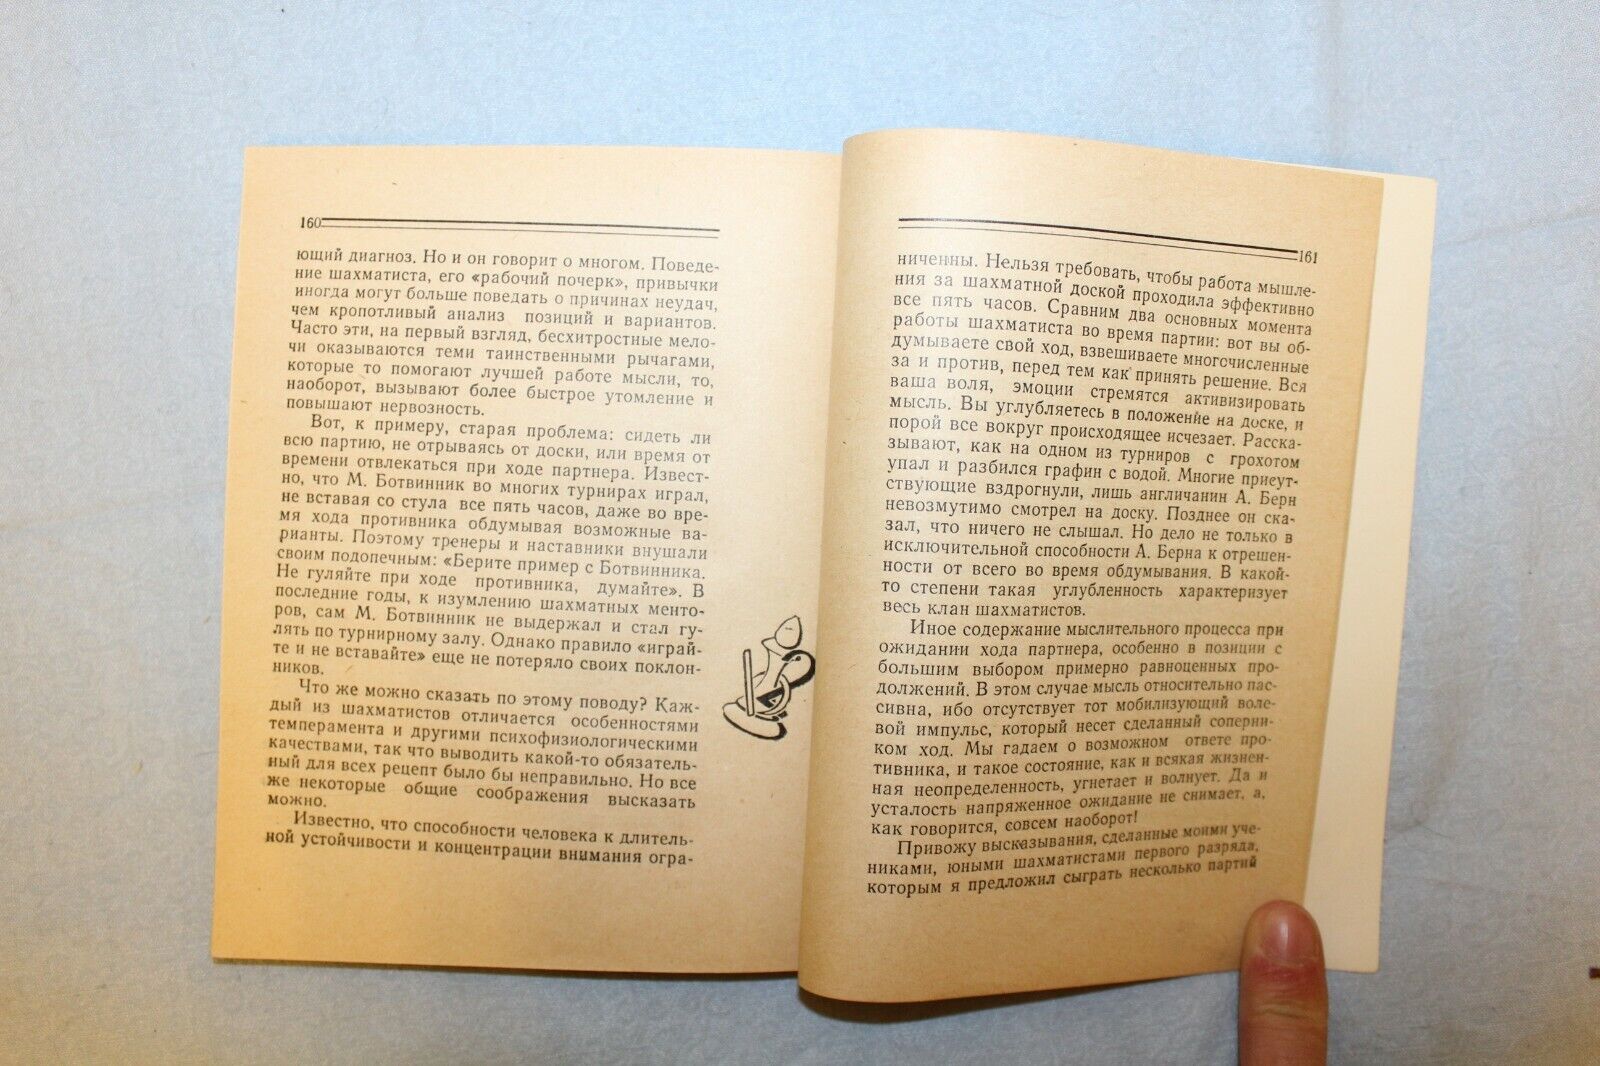 11699.Soviet Chess Book signed by author N.Krogius to Y.Brazilsky. Saratov 1967